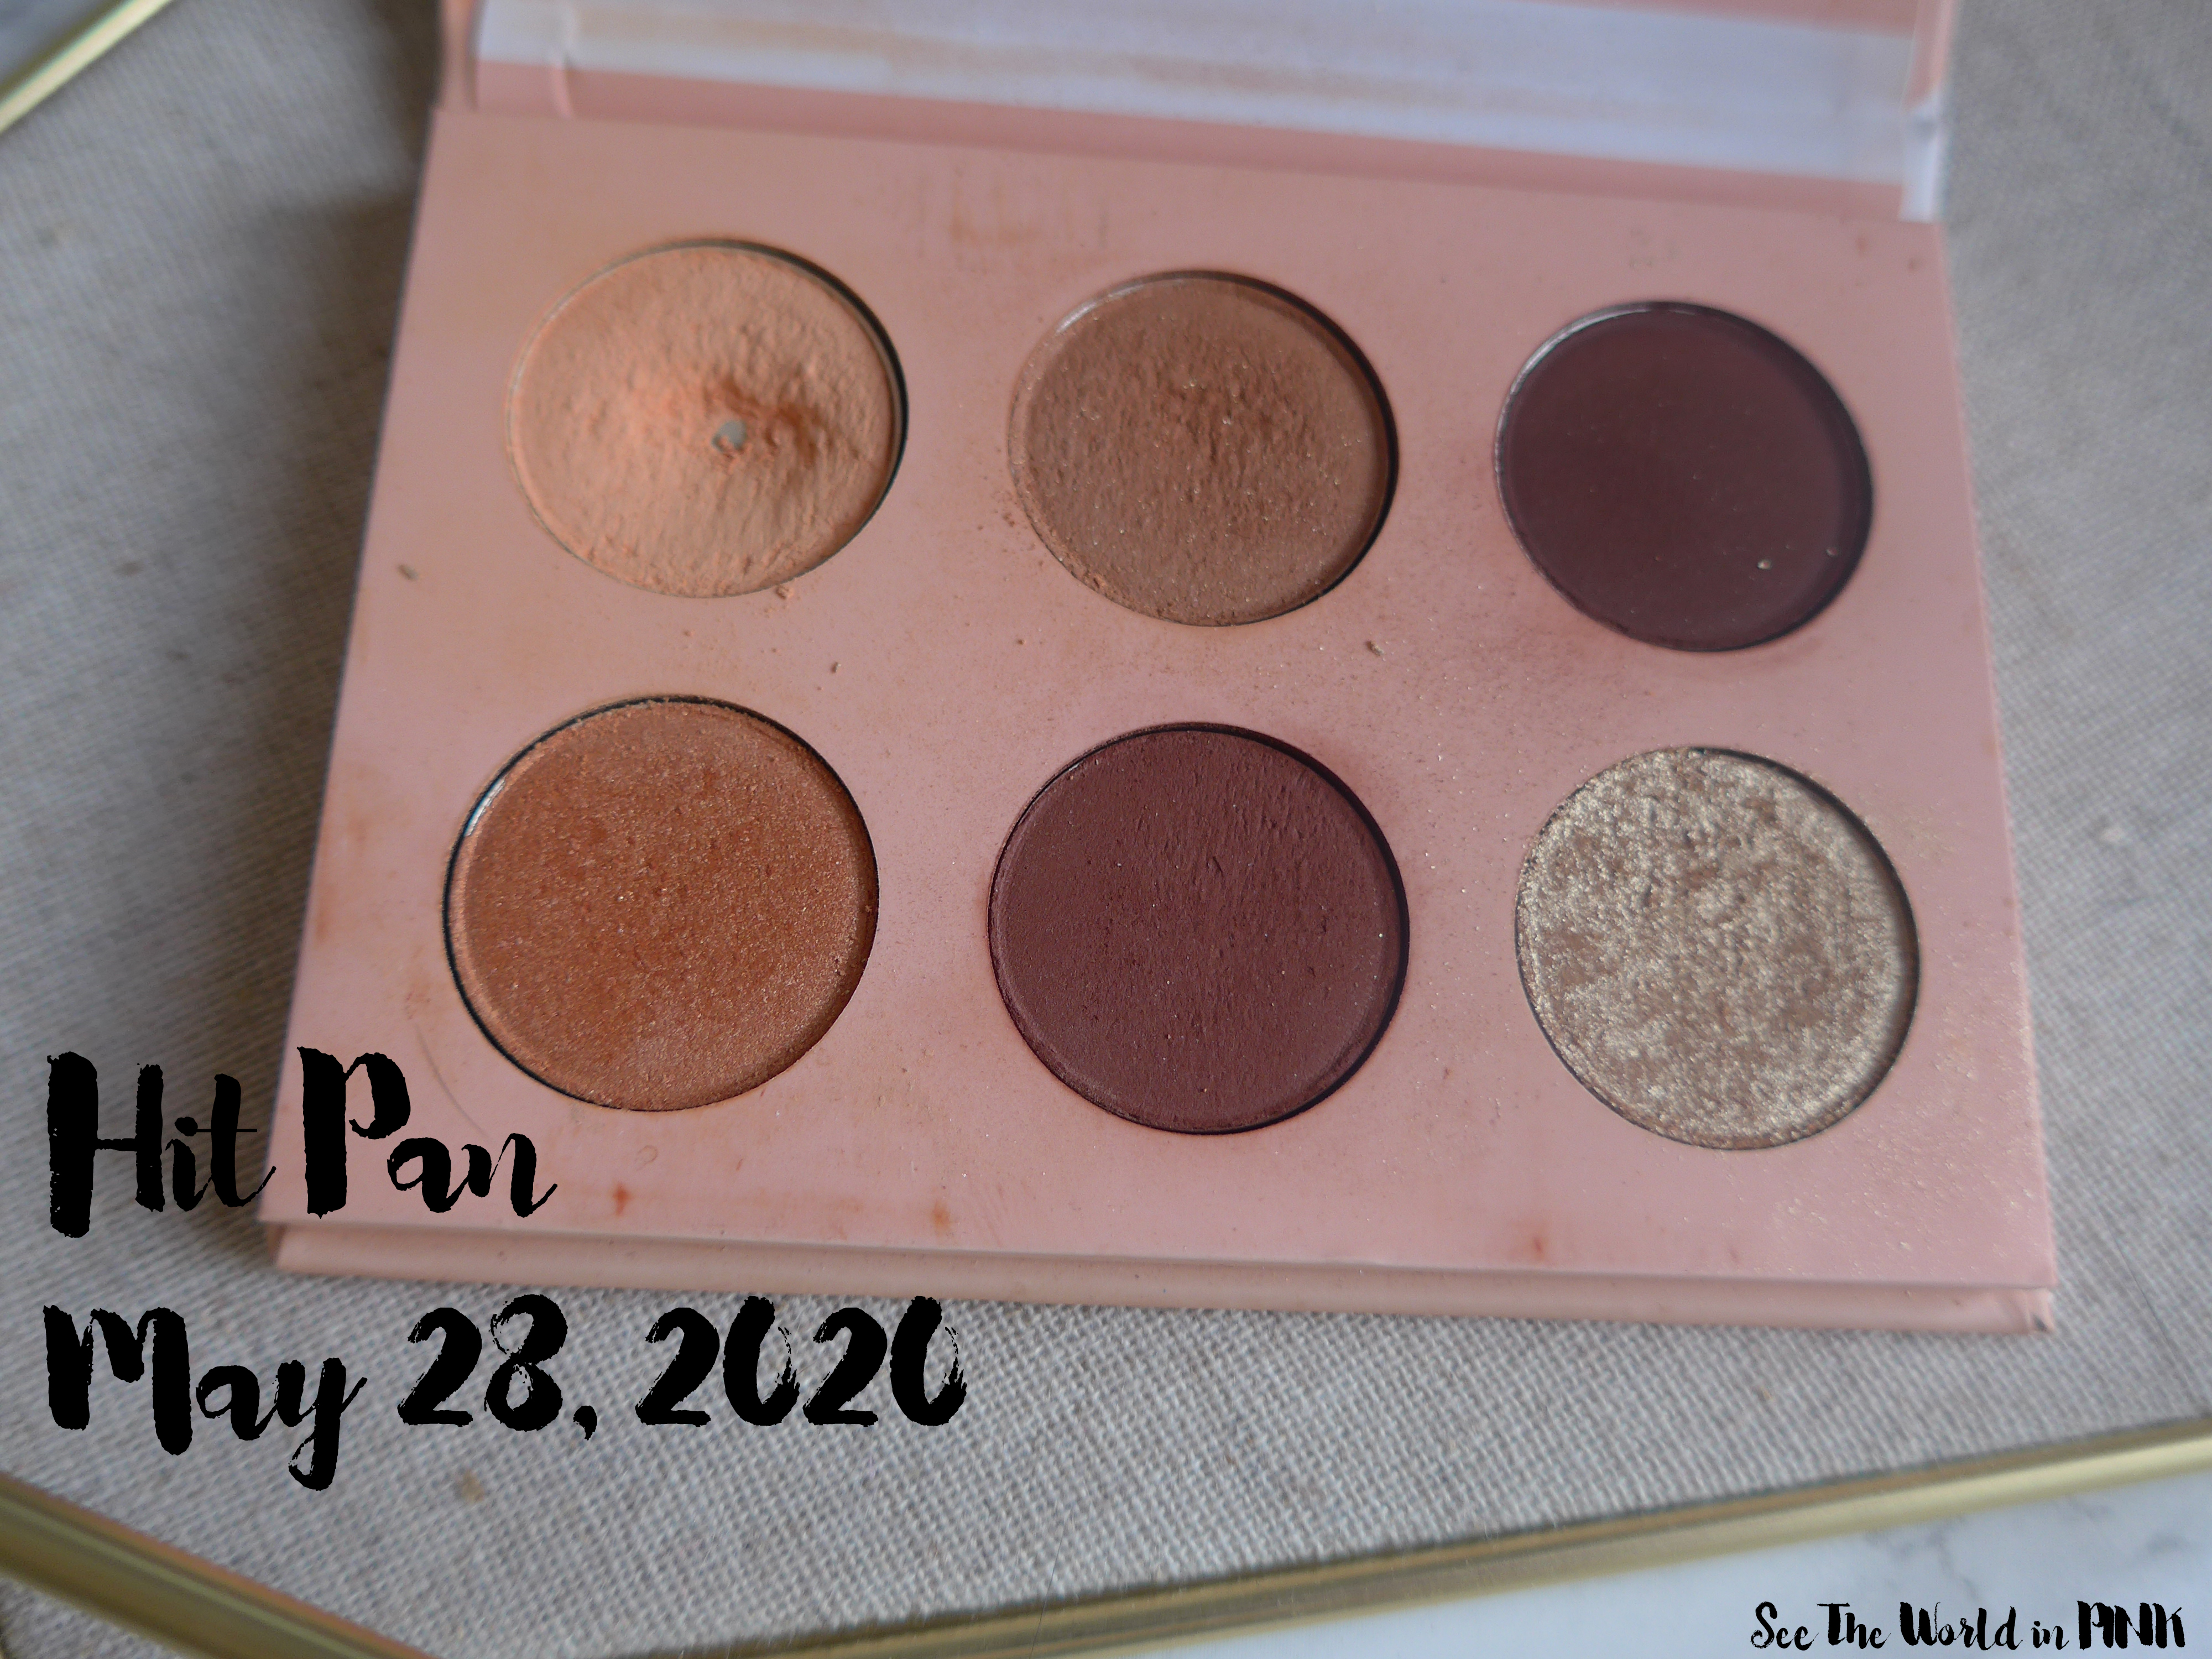 20 in 2020 Project Pan - Update #3